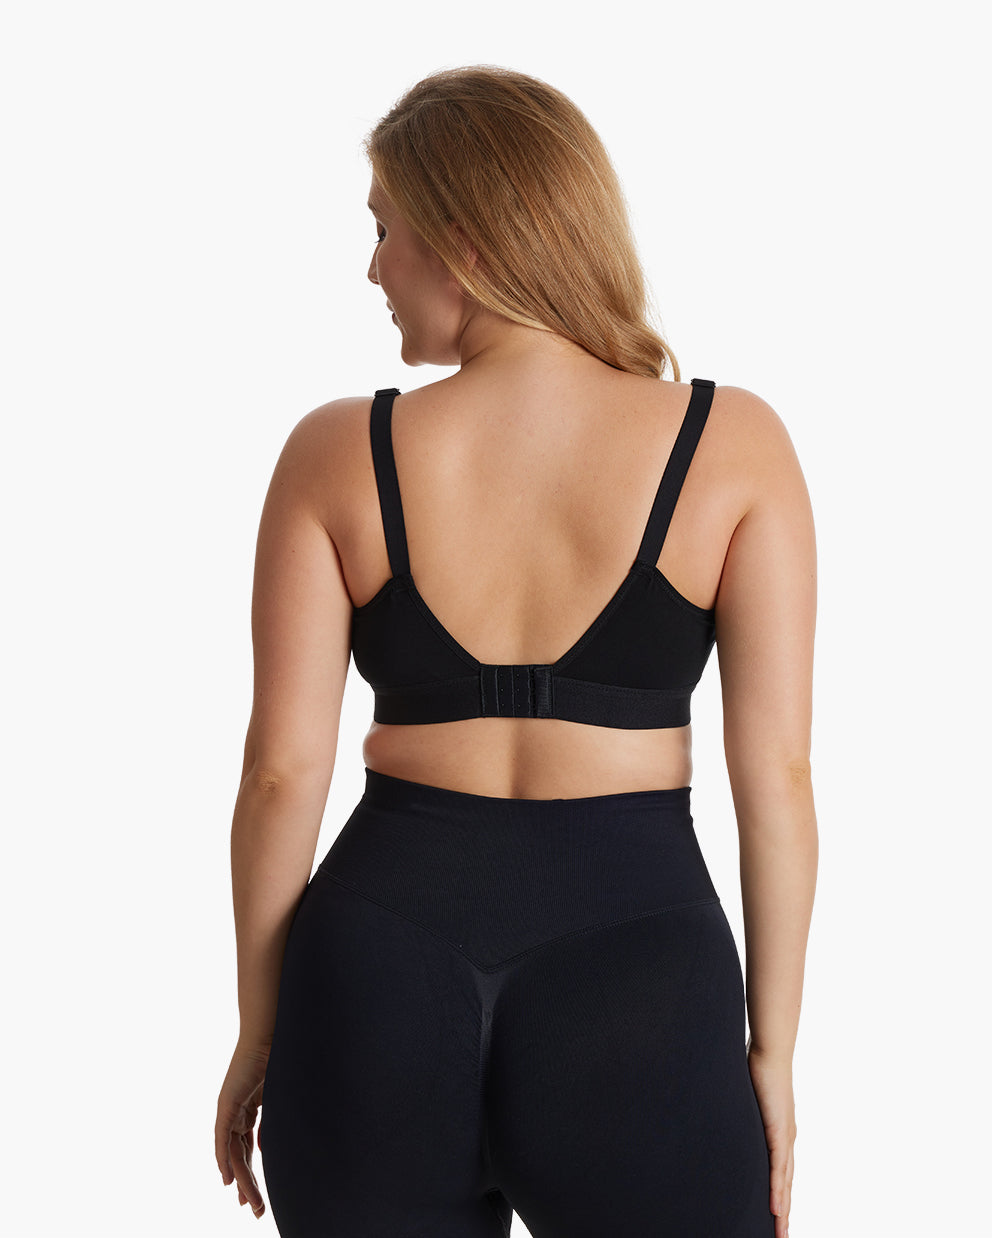 Woman wearing black bamboo ultra-soft and cool breeze pumping and nursing bra HF018, shown from the back with adjustable straps and hook-and-eye closure.